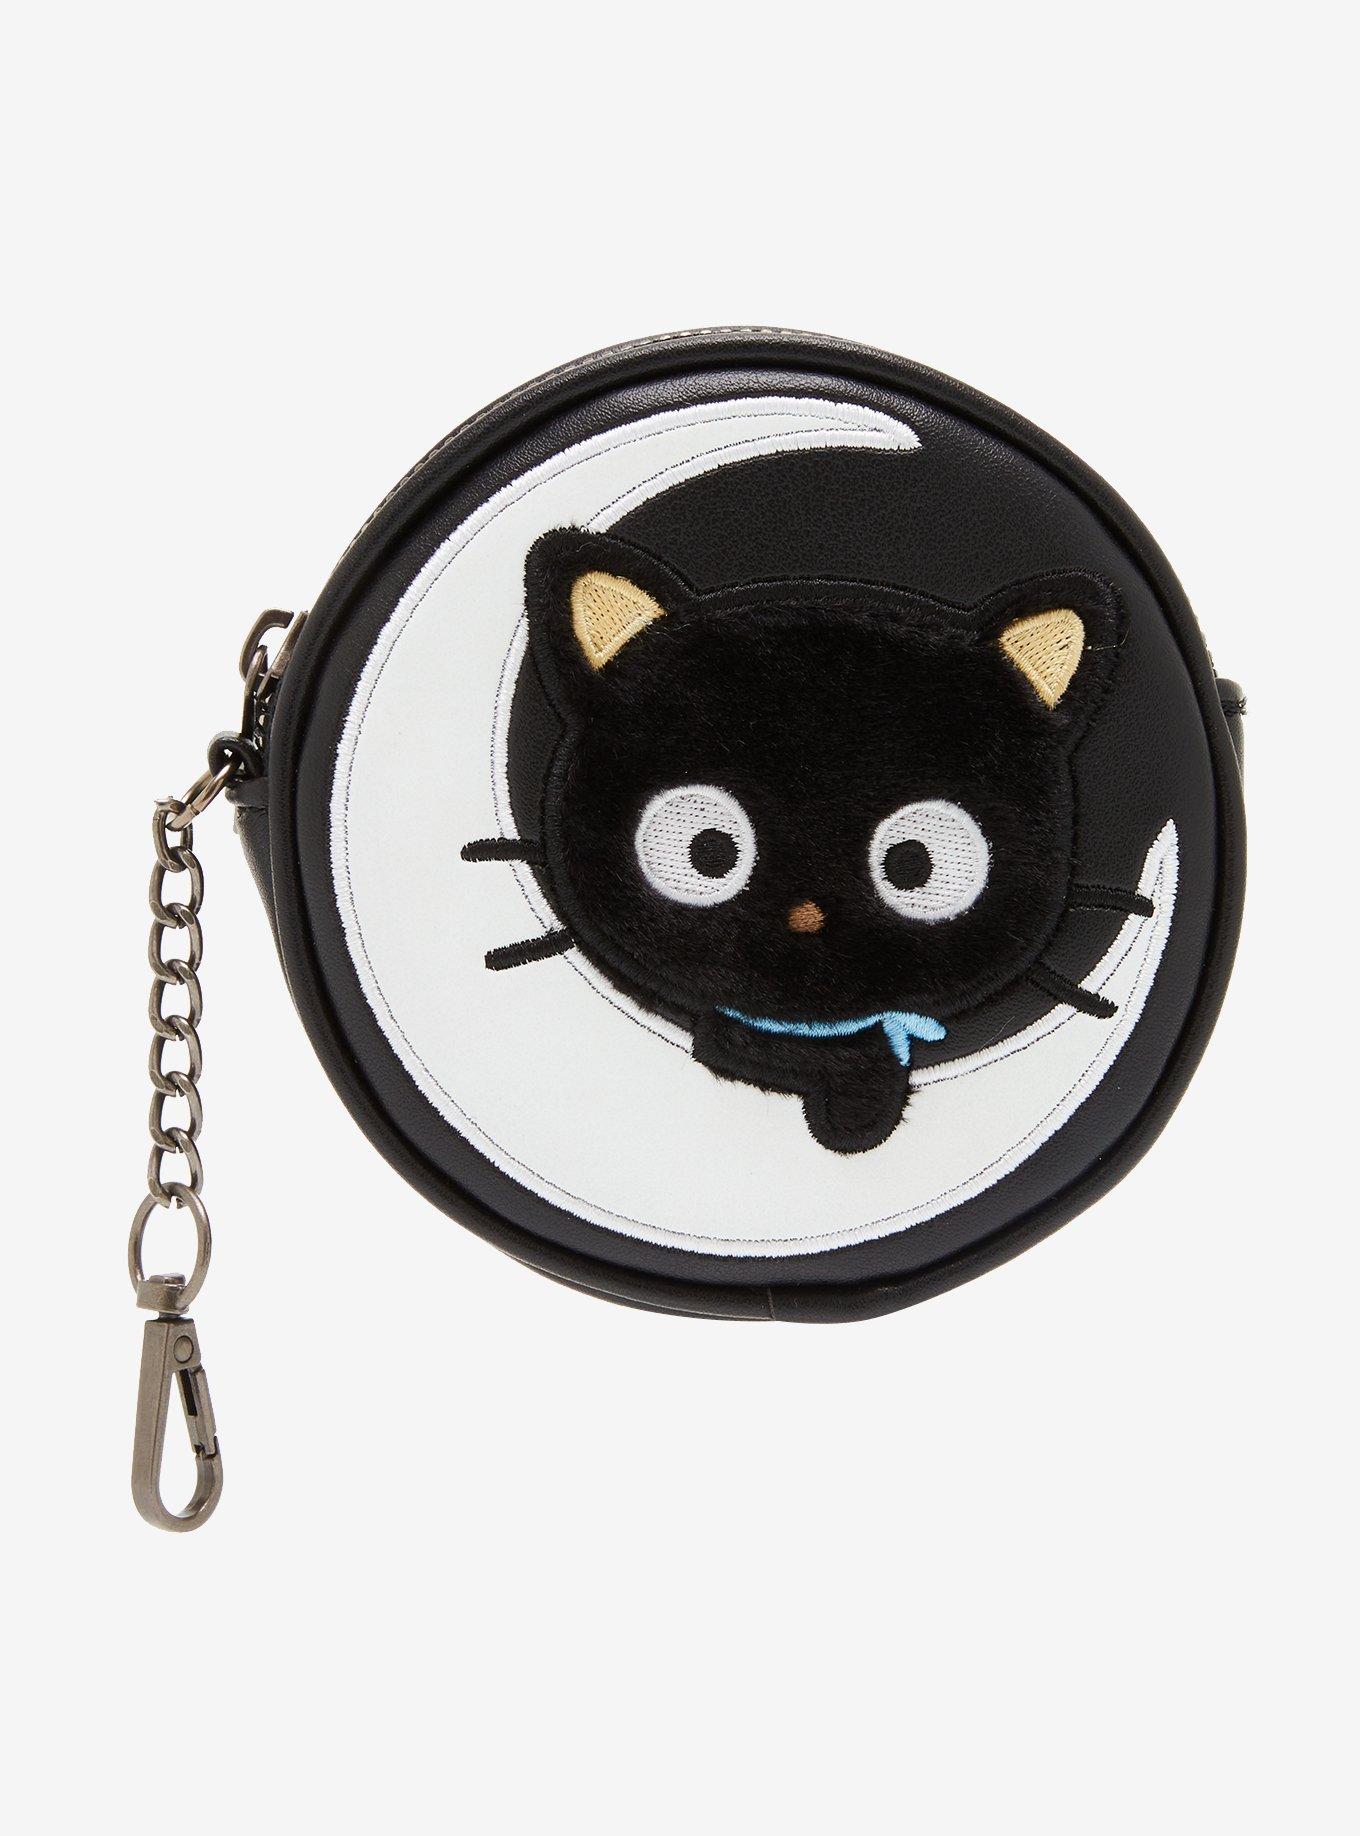 Her Universe Chococat Celestial Glow-In-The-Dark Coin Purse